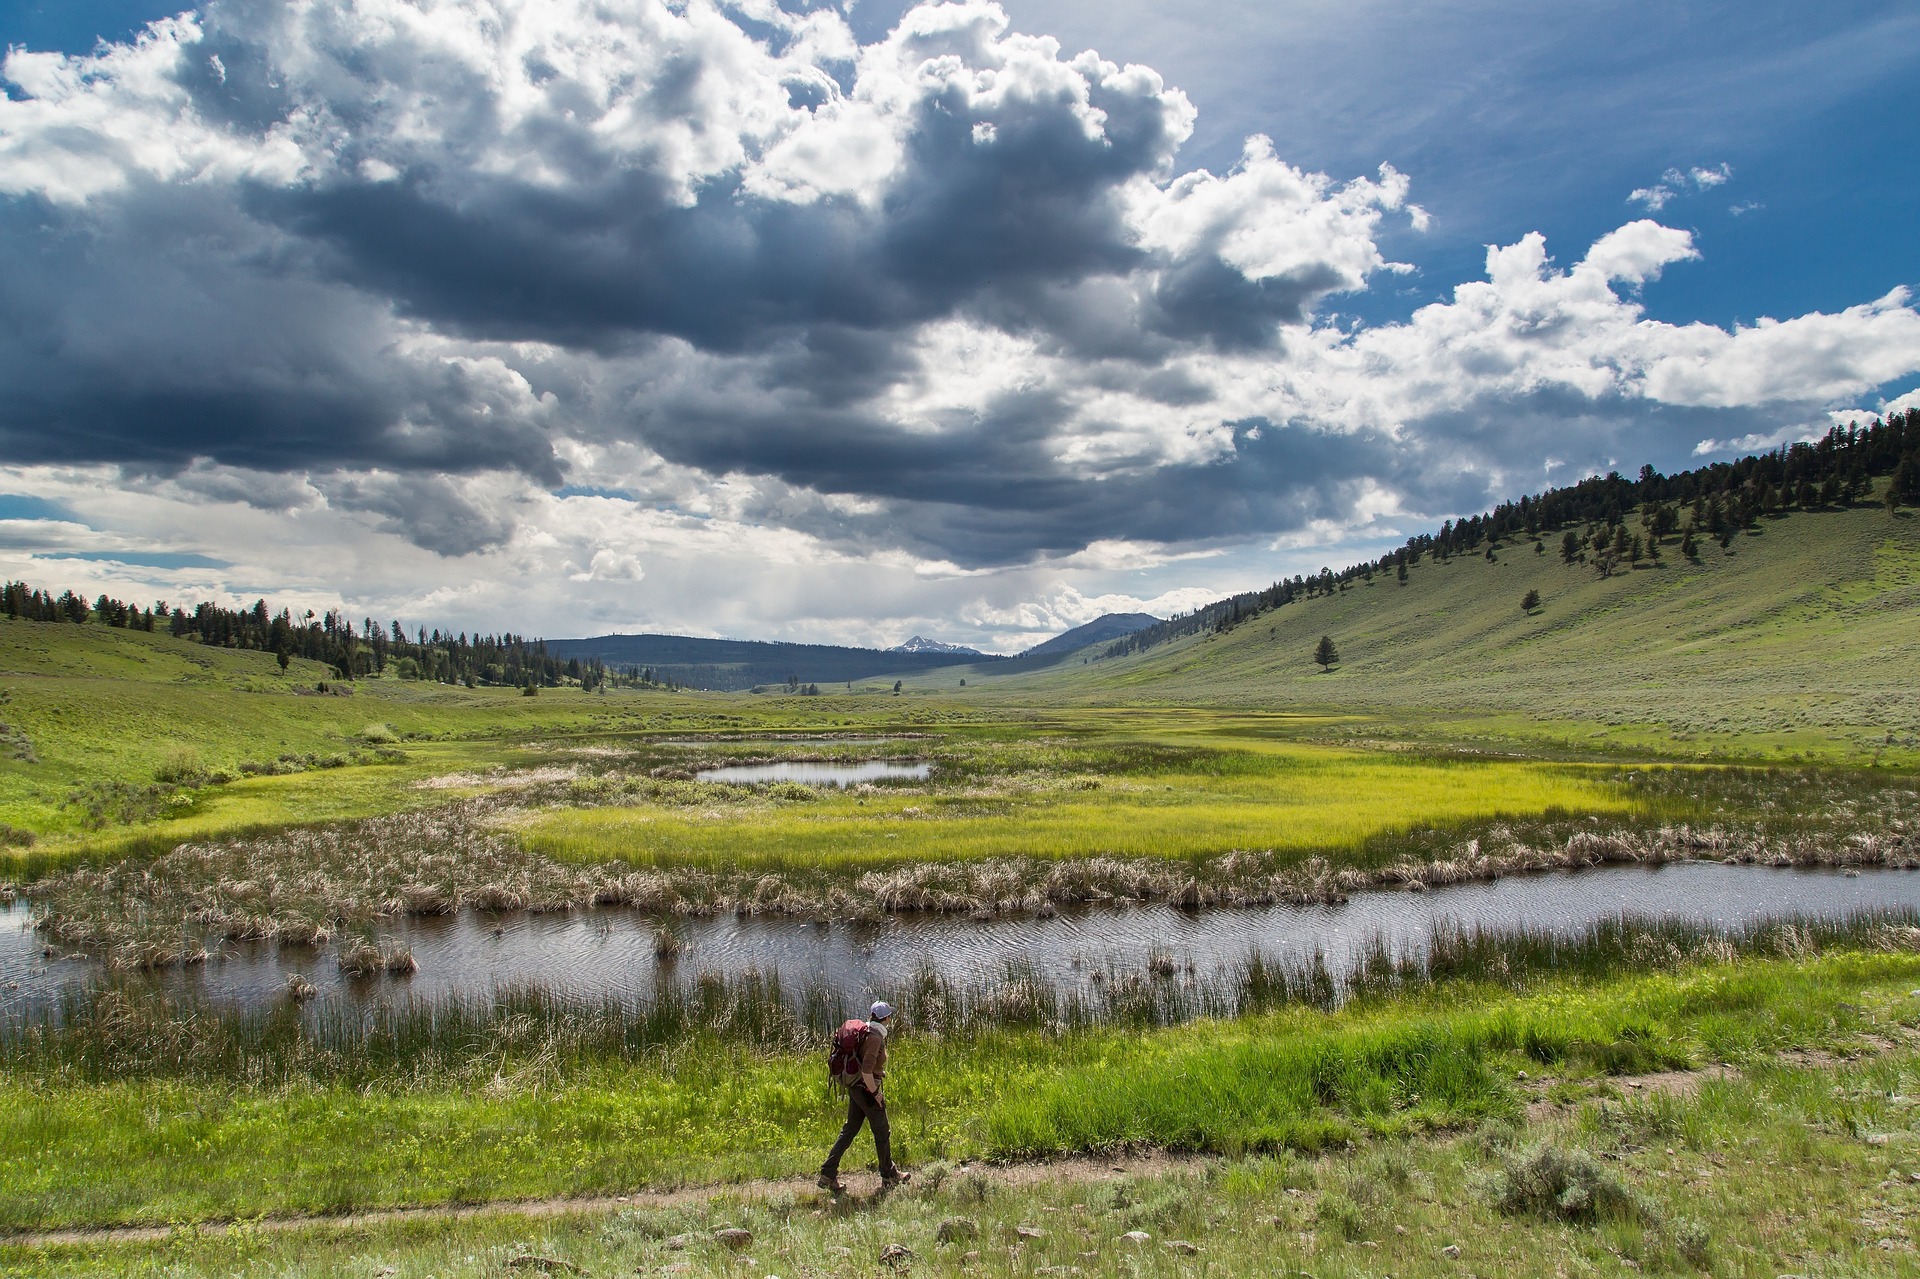 Situated only six miles from Yellowstone National Park we enjoy convenient access to both national treasures and best-kept secrets. Book a guided adventure in the park or enjoy fly fishing close to the property for the ultimate Montana getaway.